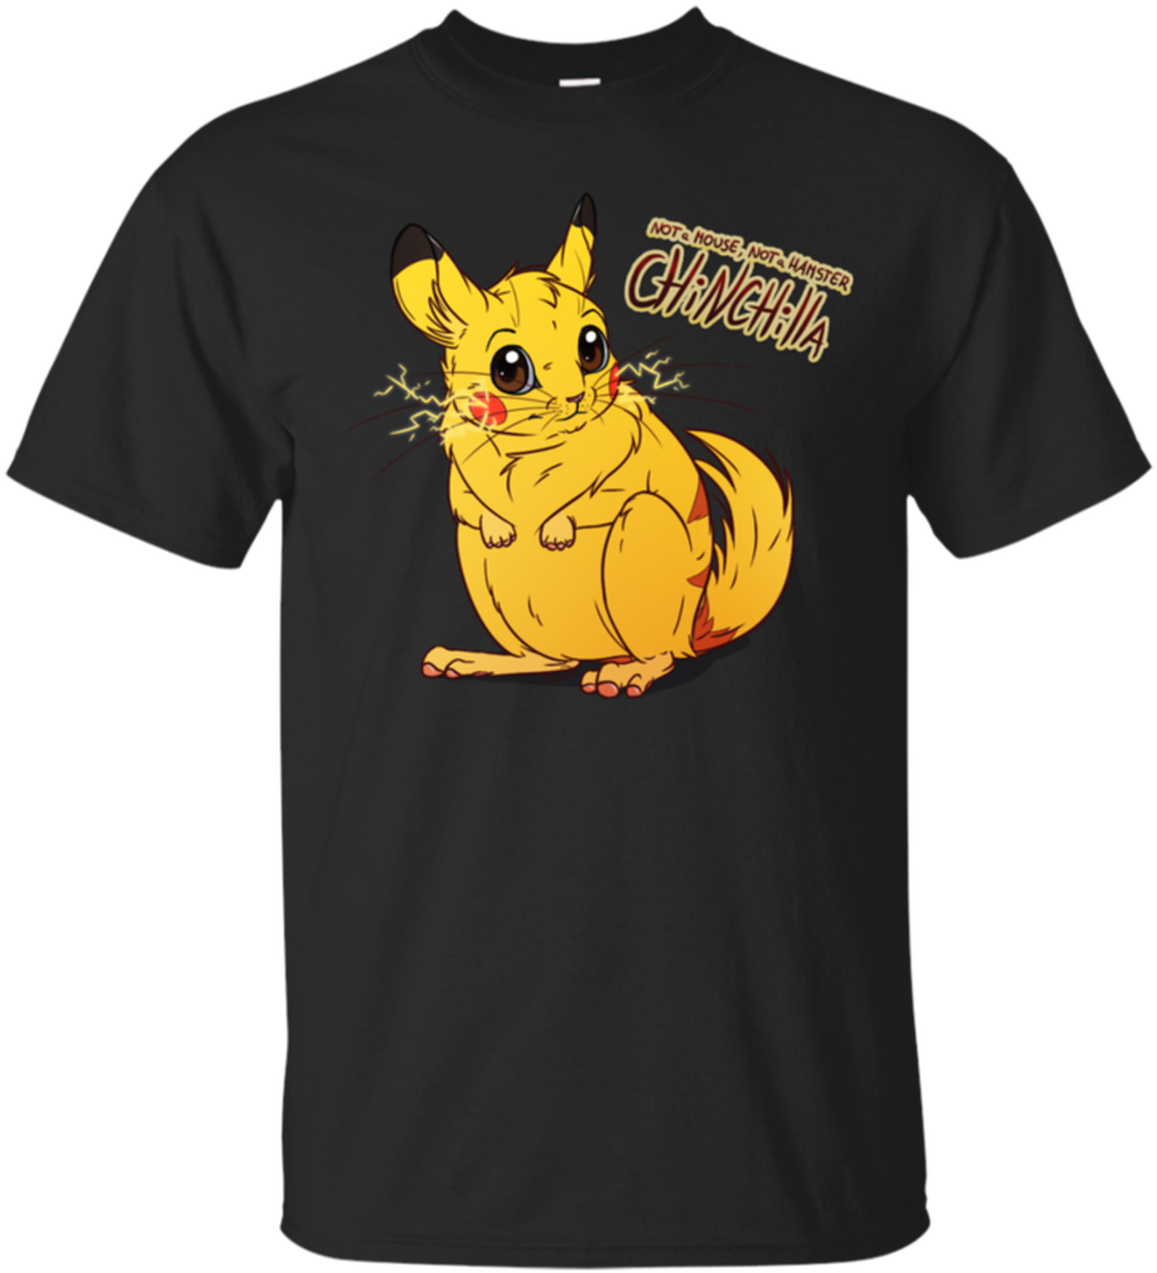 A Black T-shirt With A Cartoon Of A Yellow Animal